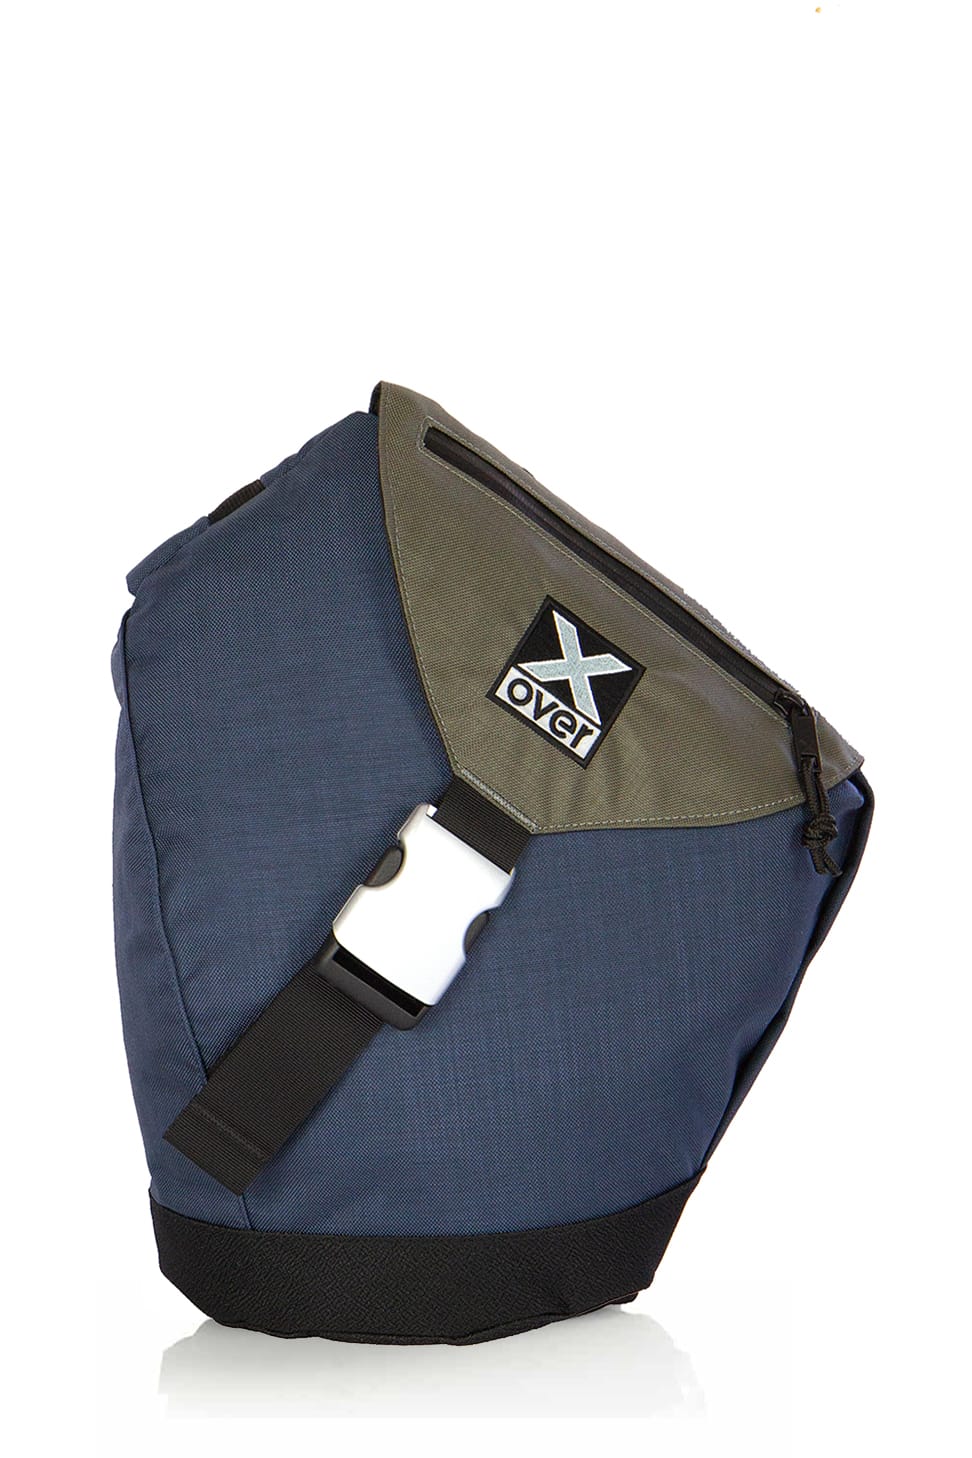 X-over Agility bag in color frozen blue